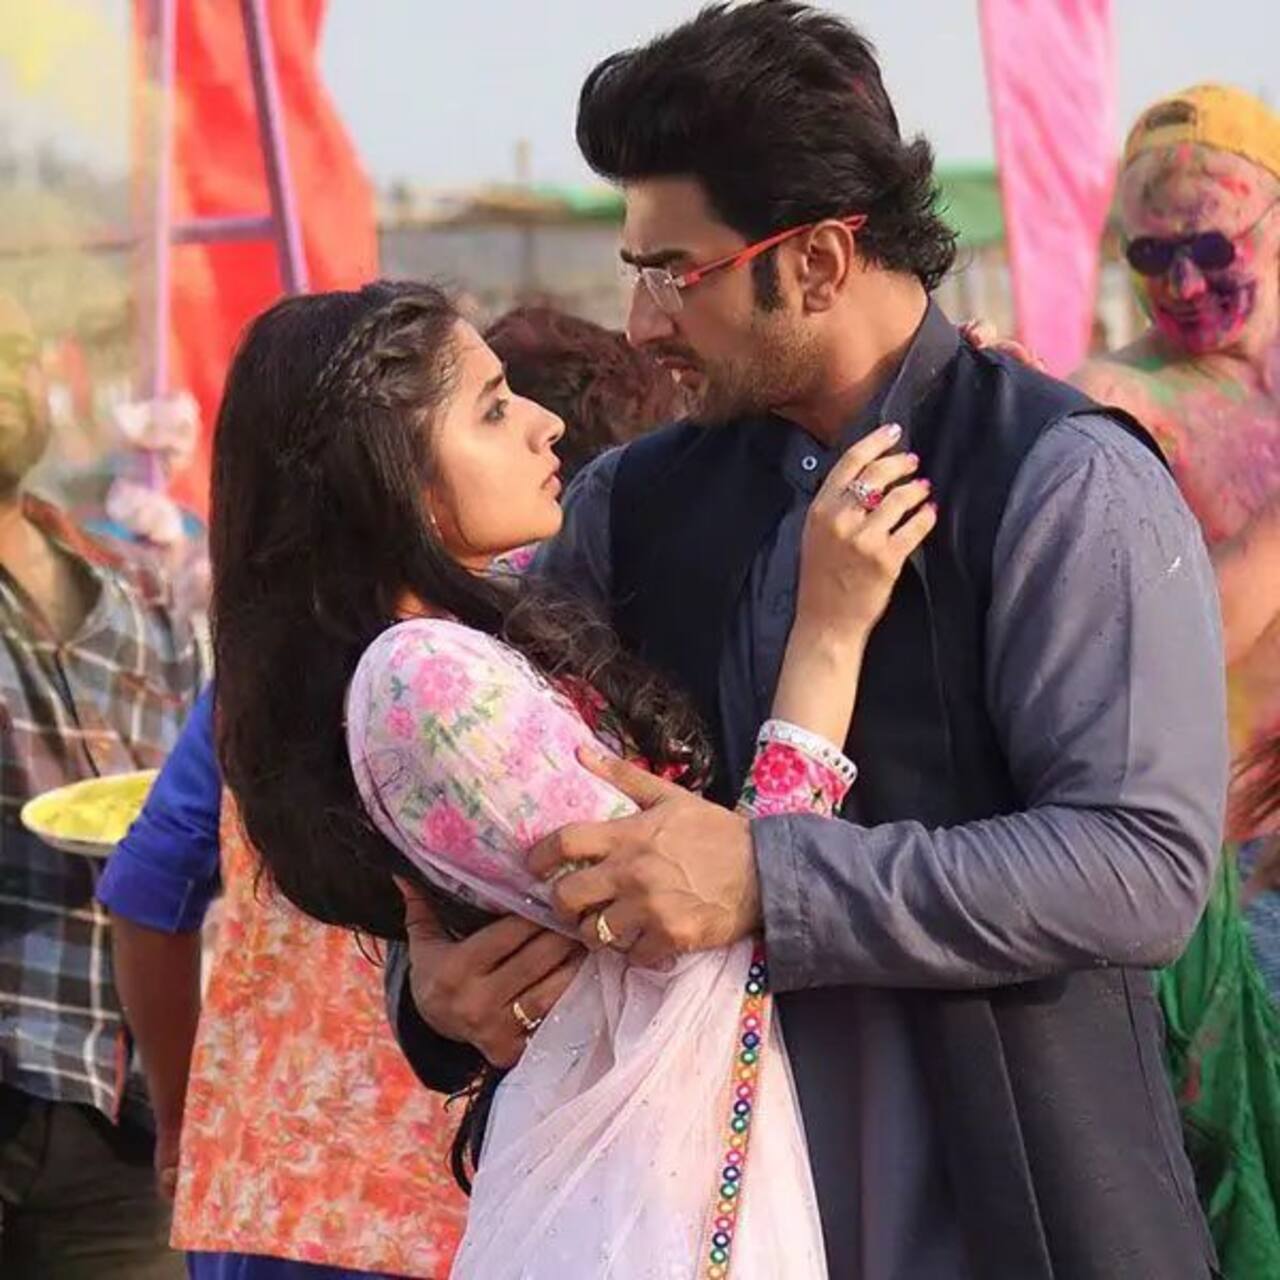 Guddan Tumse Na Ho Payega 22 May 2019 written update of full episode: Akshat finds a video footage which will prove Guddan's innocence